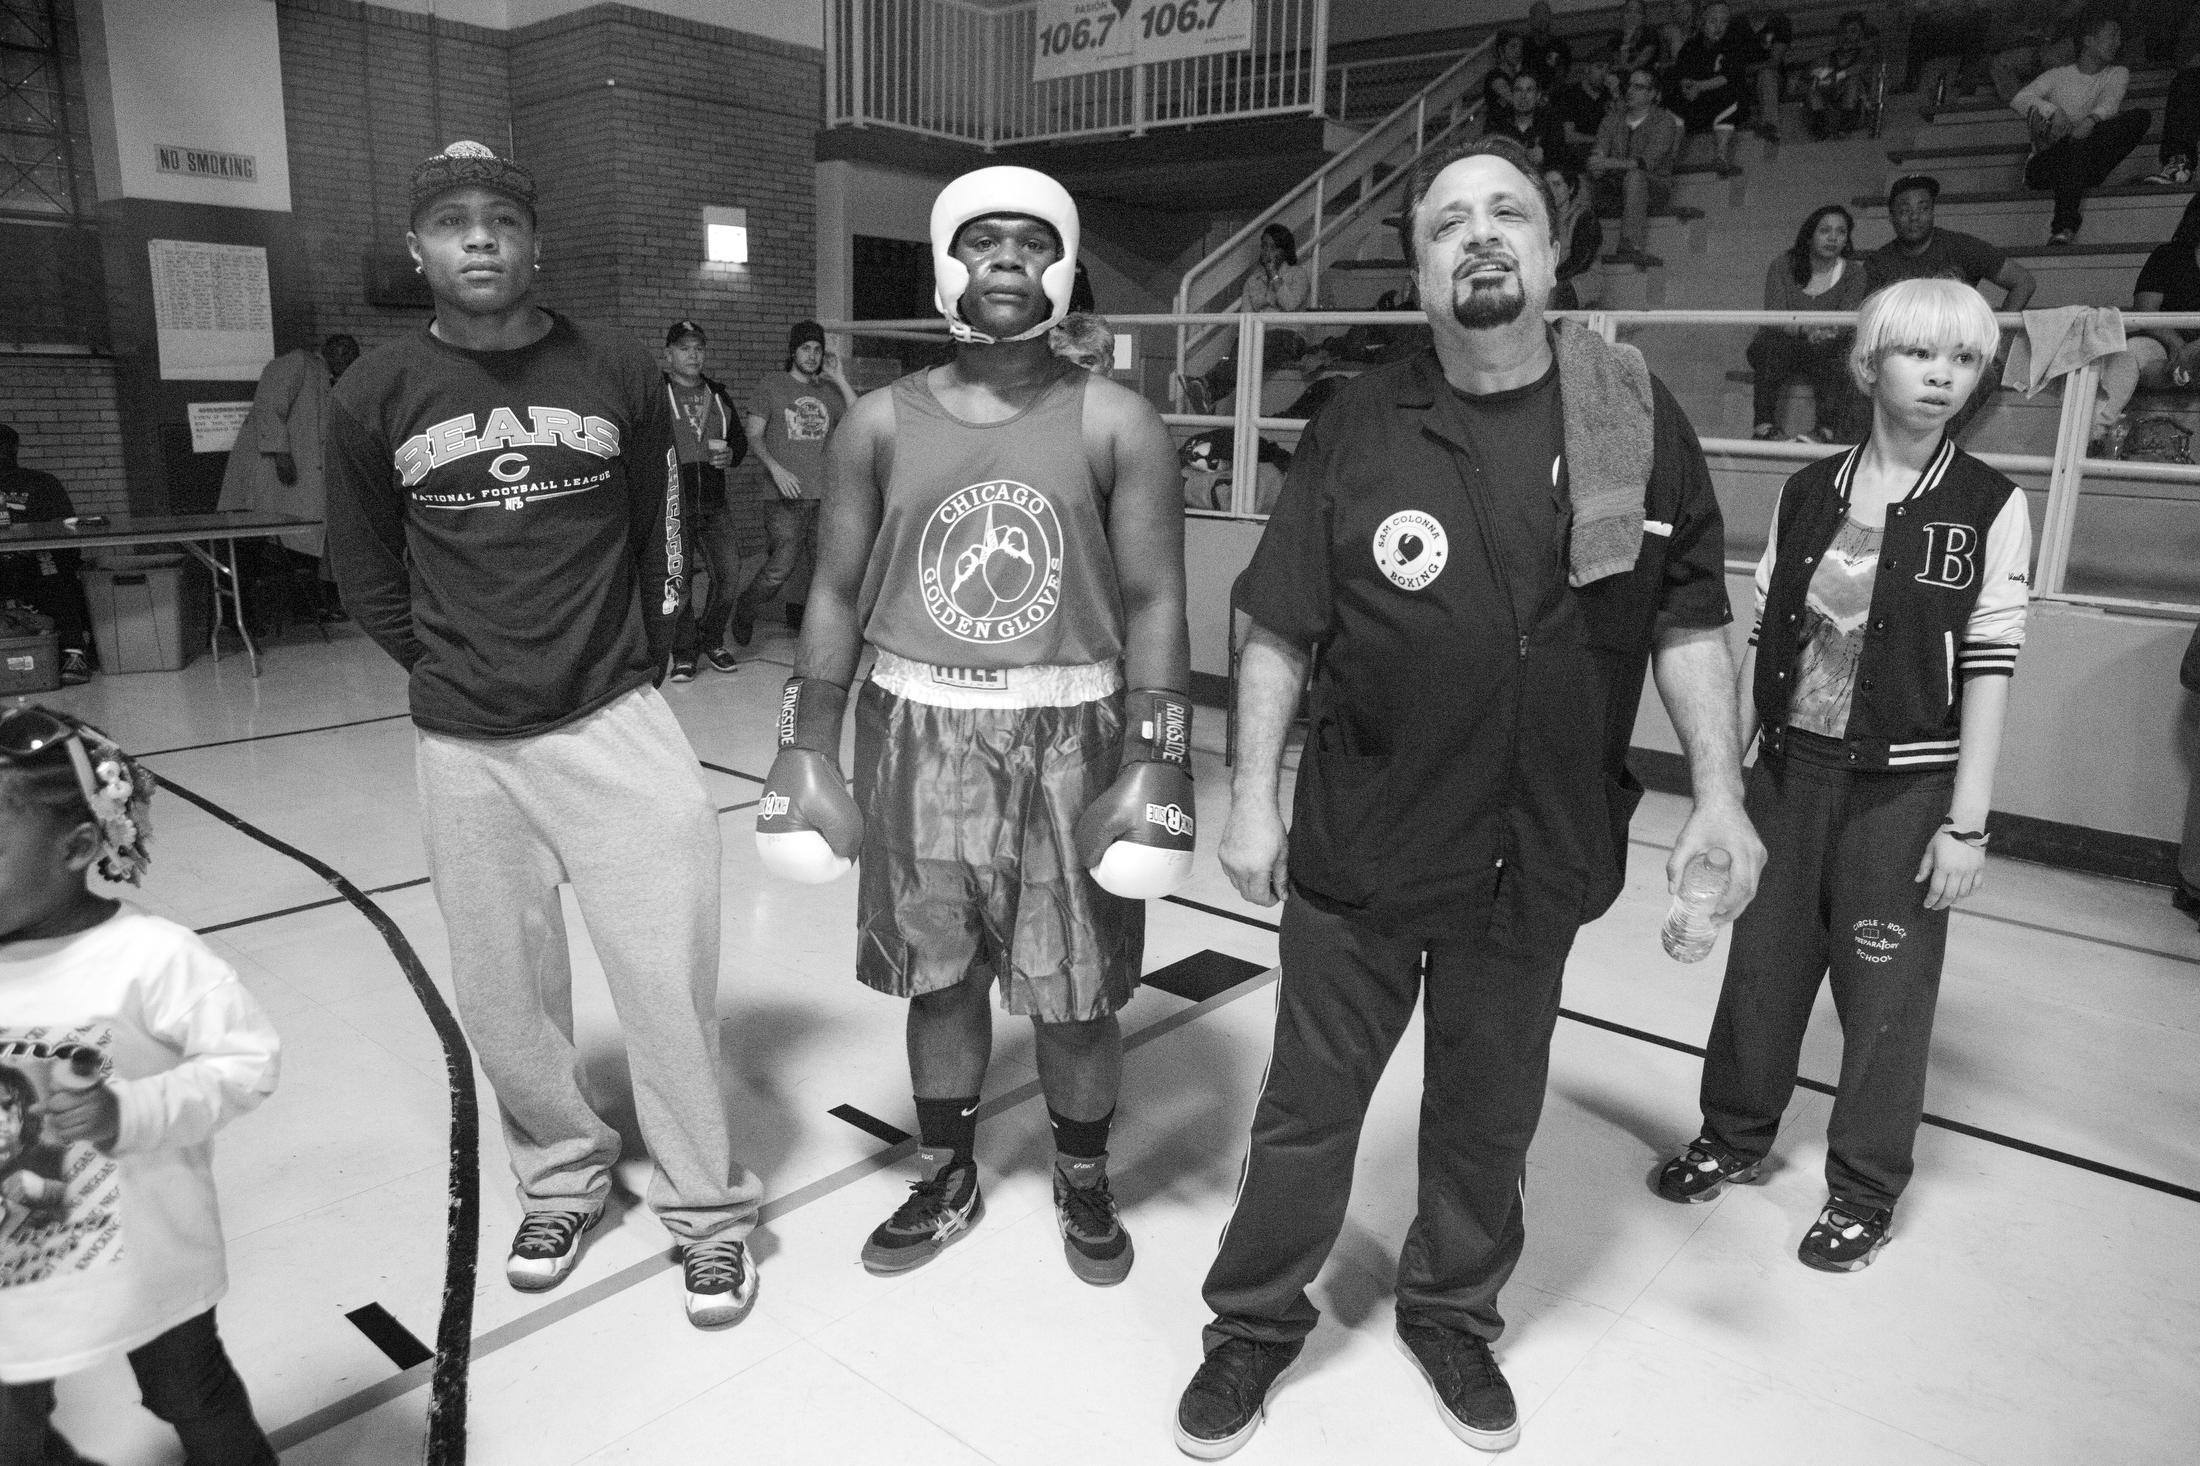 10 years in a boxing gym - Dionte waiting for his final at the Chicago Golden Gloves...